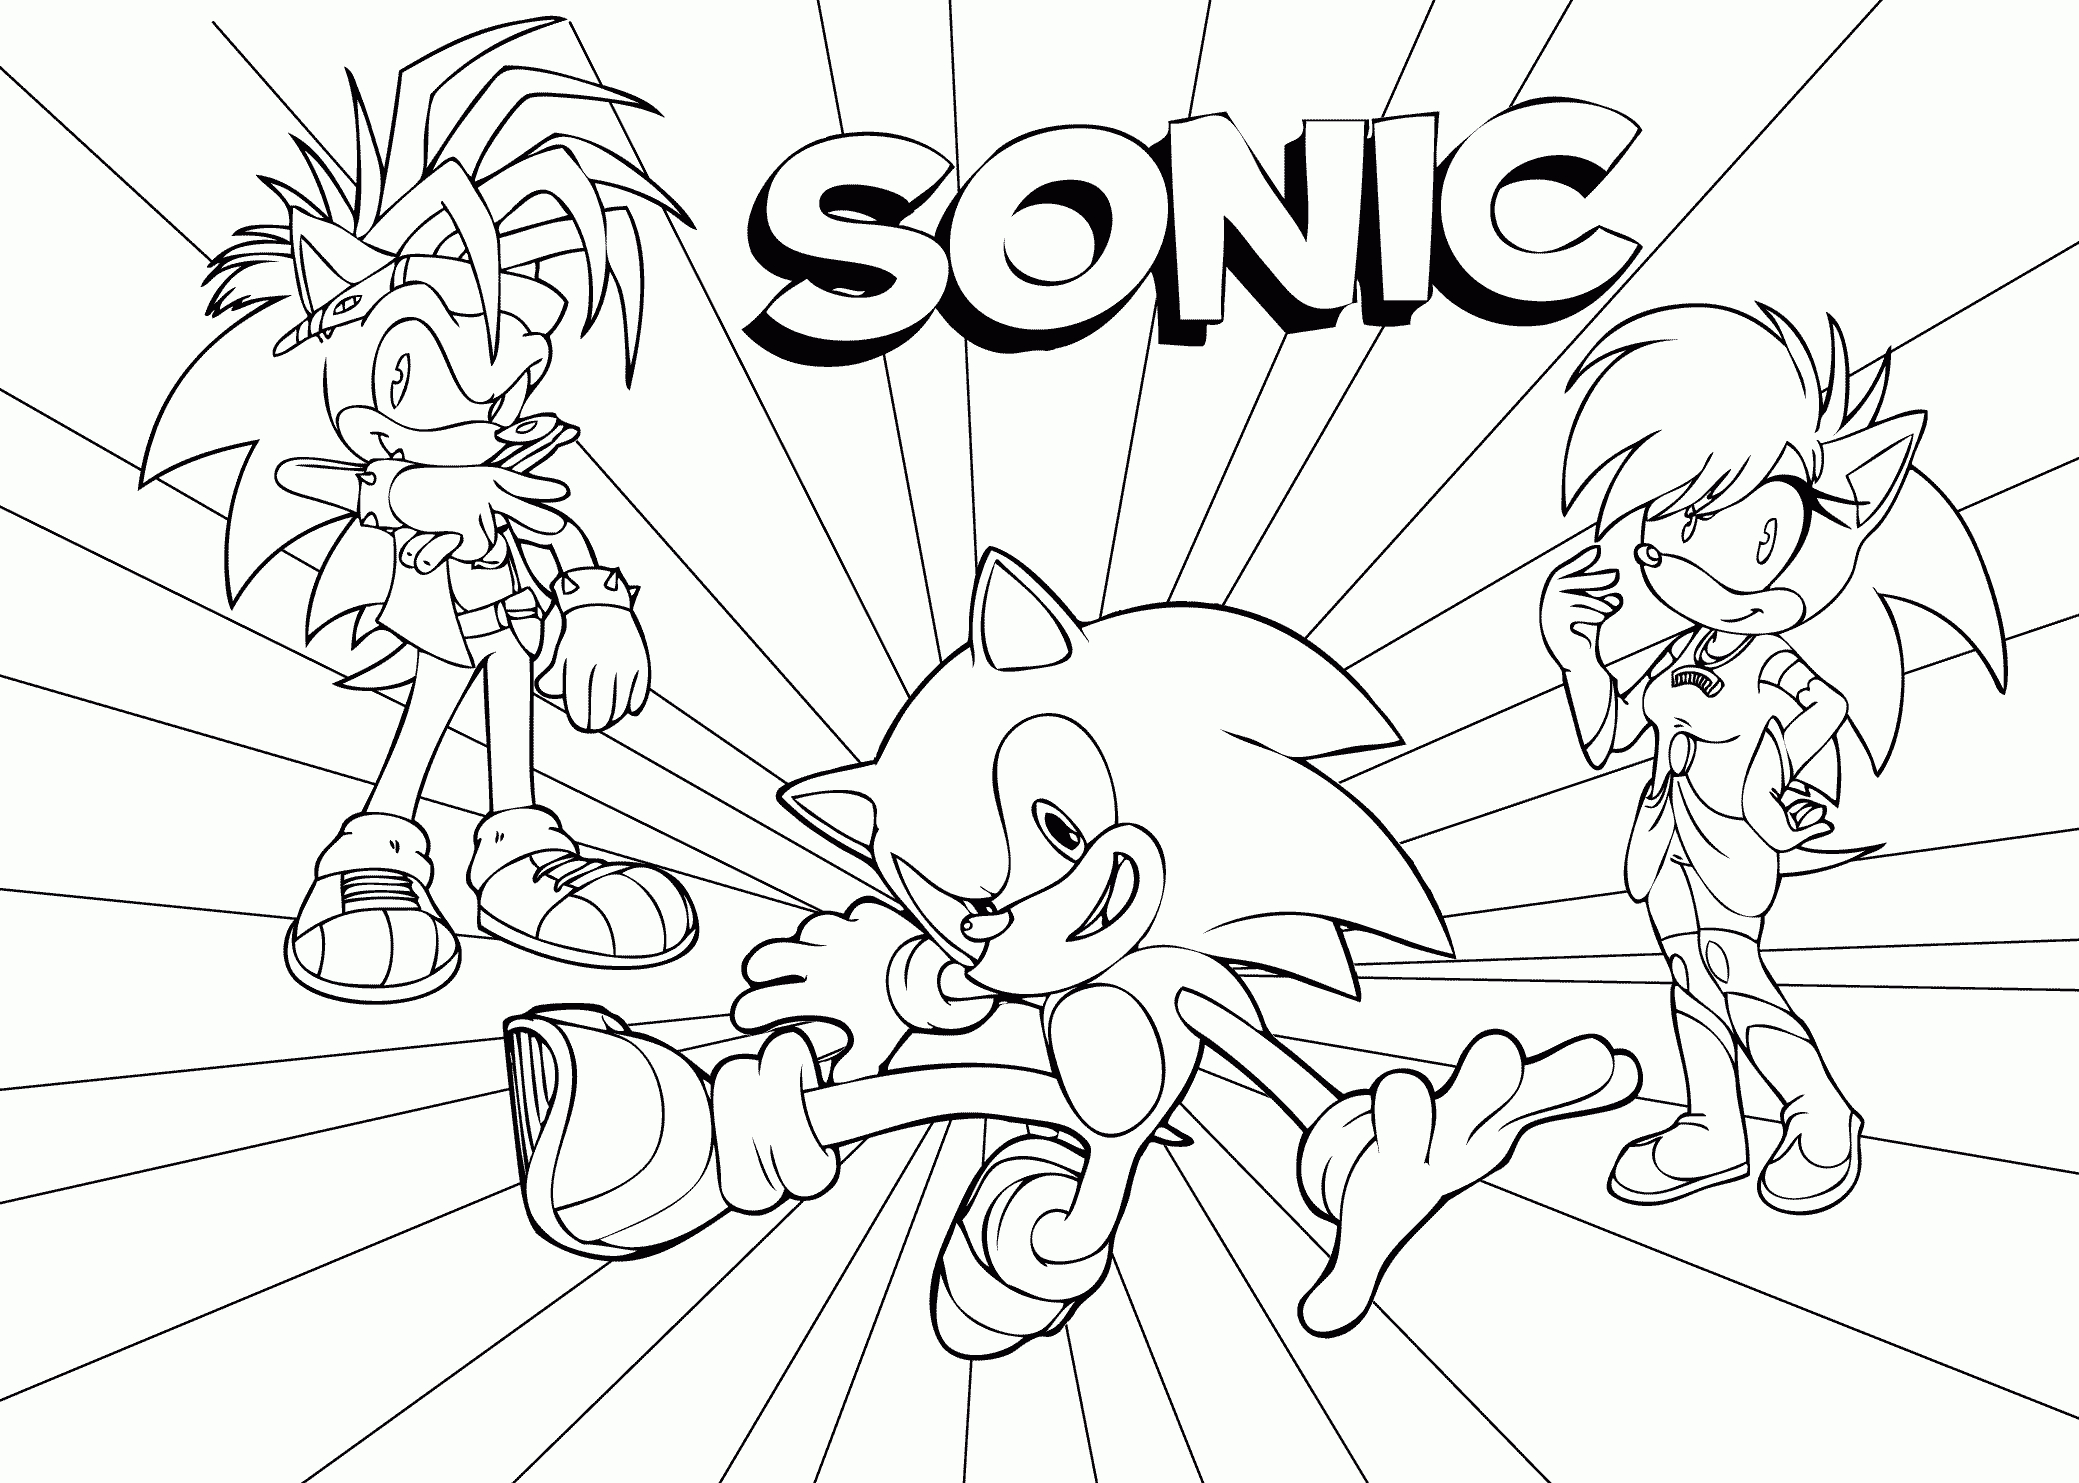 Coloring Pages : Sonic Coloring Book Pages For Kids Free Printable J - Sonic Coloring Pages Free Printable